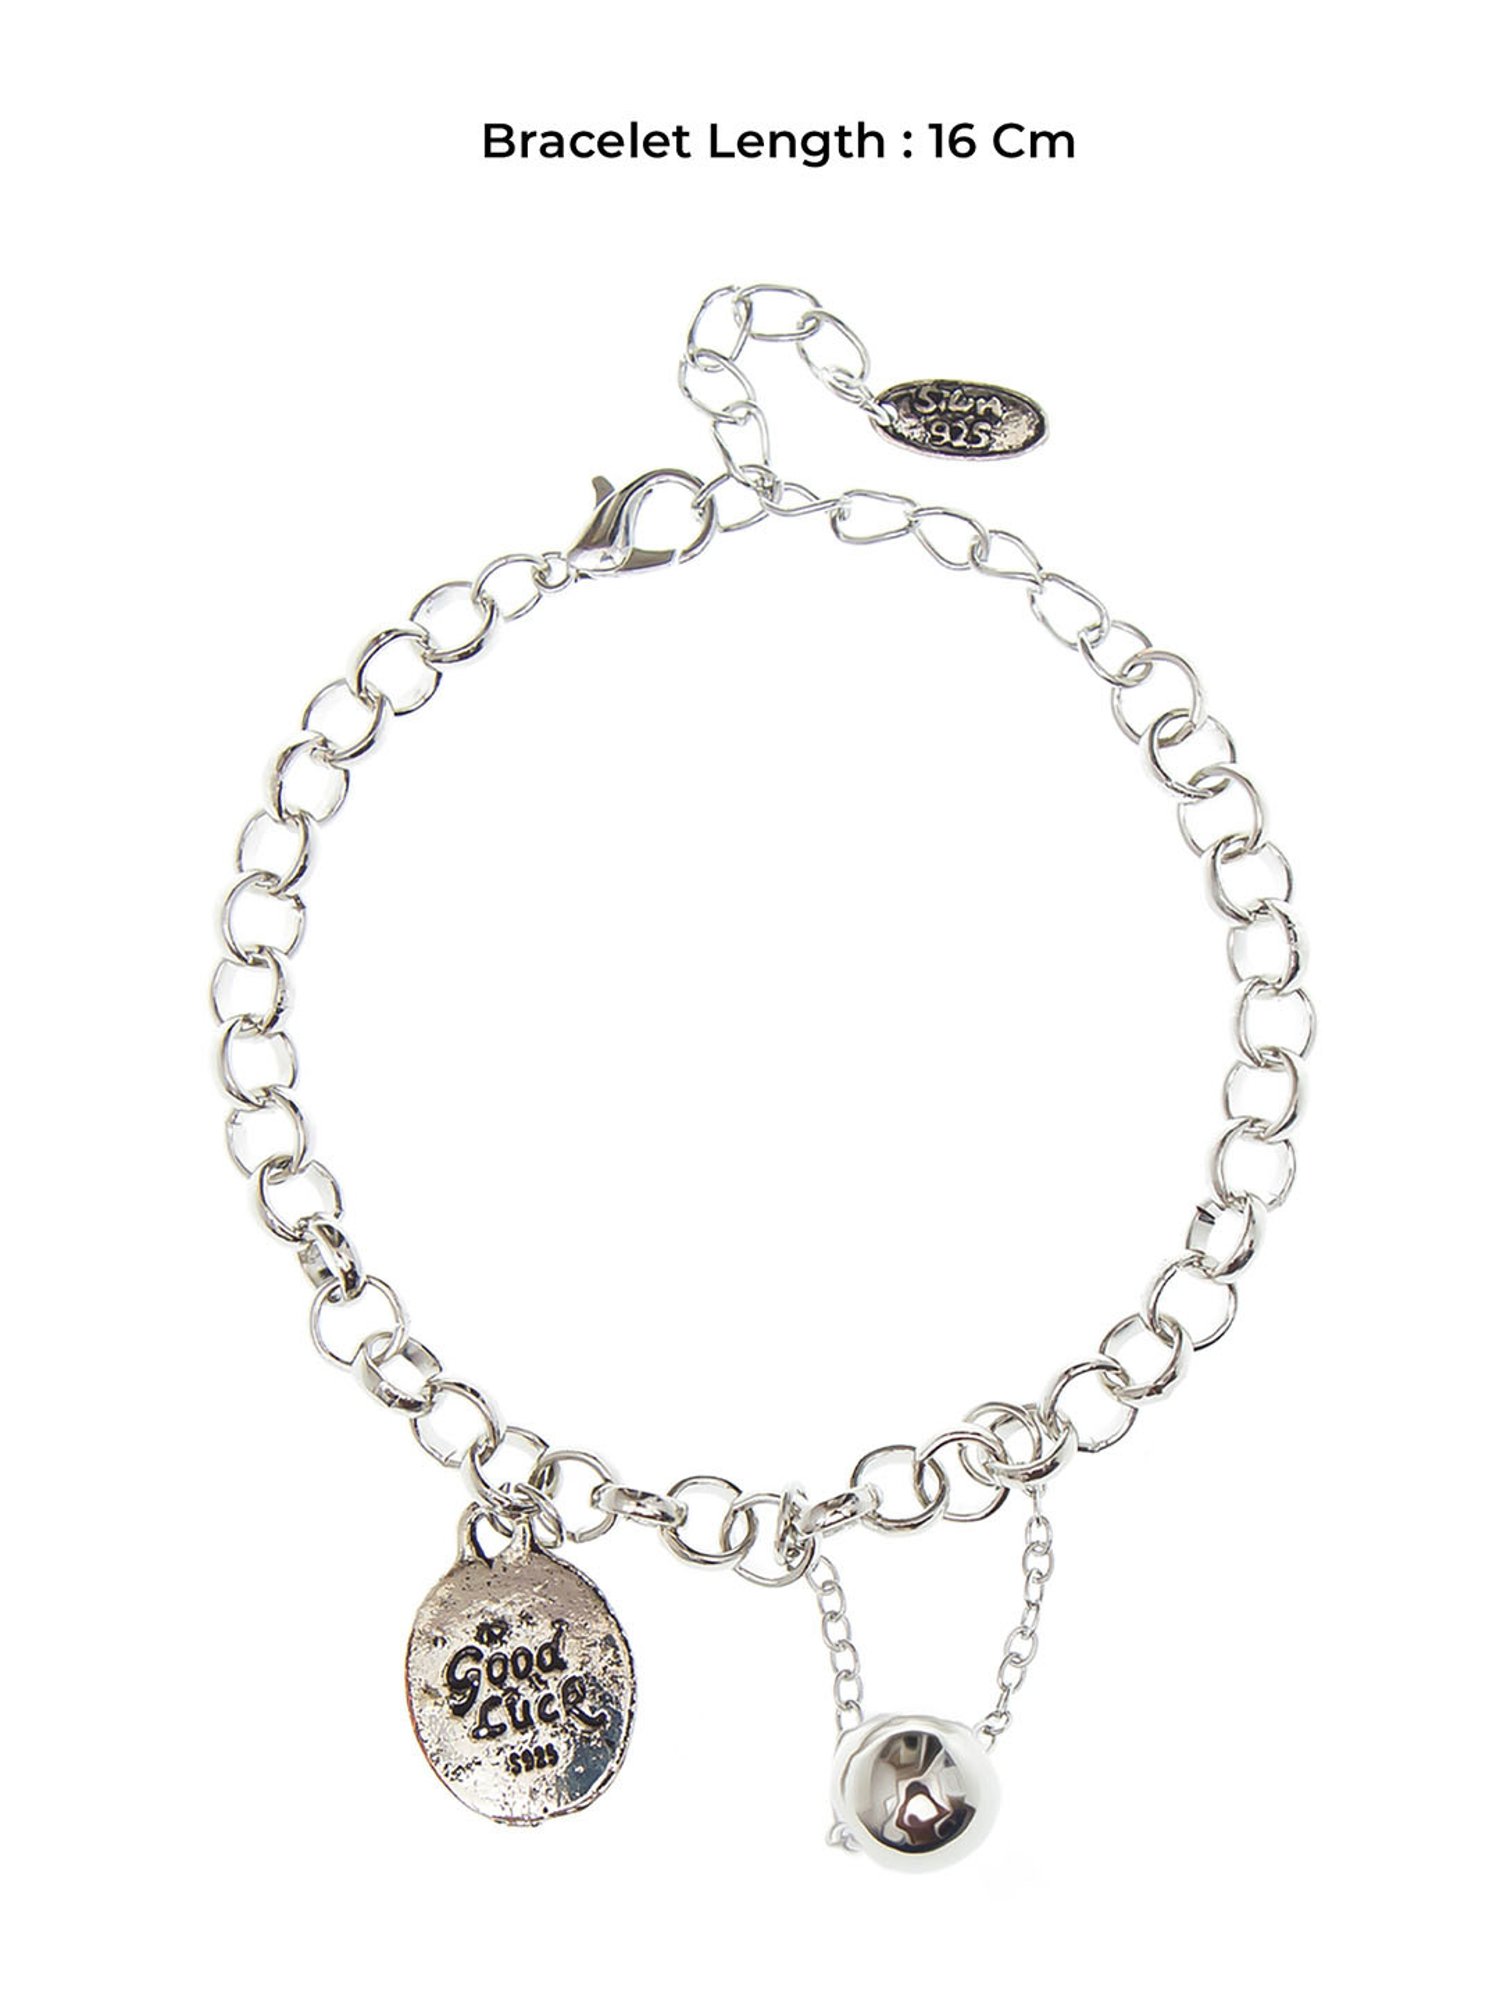 Adjustable Bangle with White House Charm in Silver Finish – White House  Historical Association